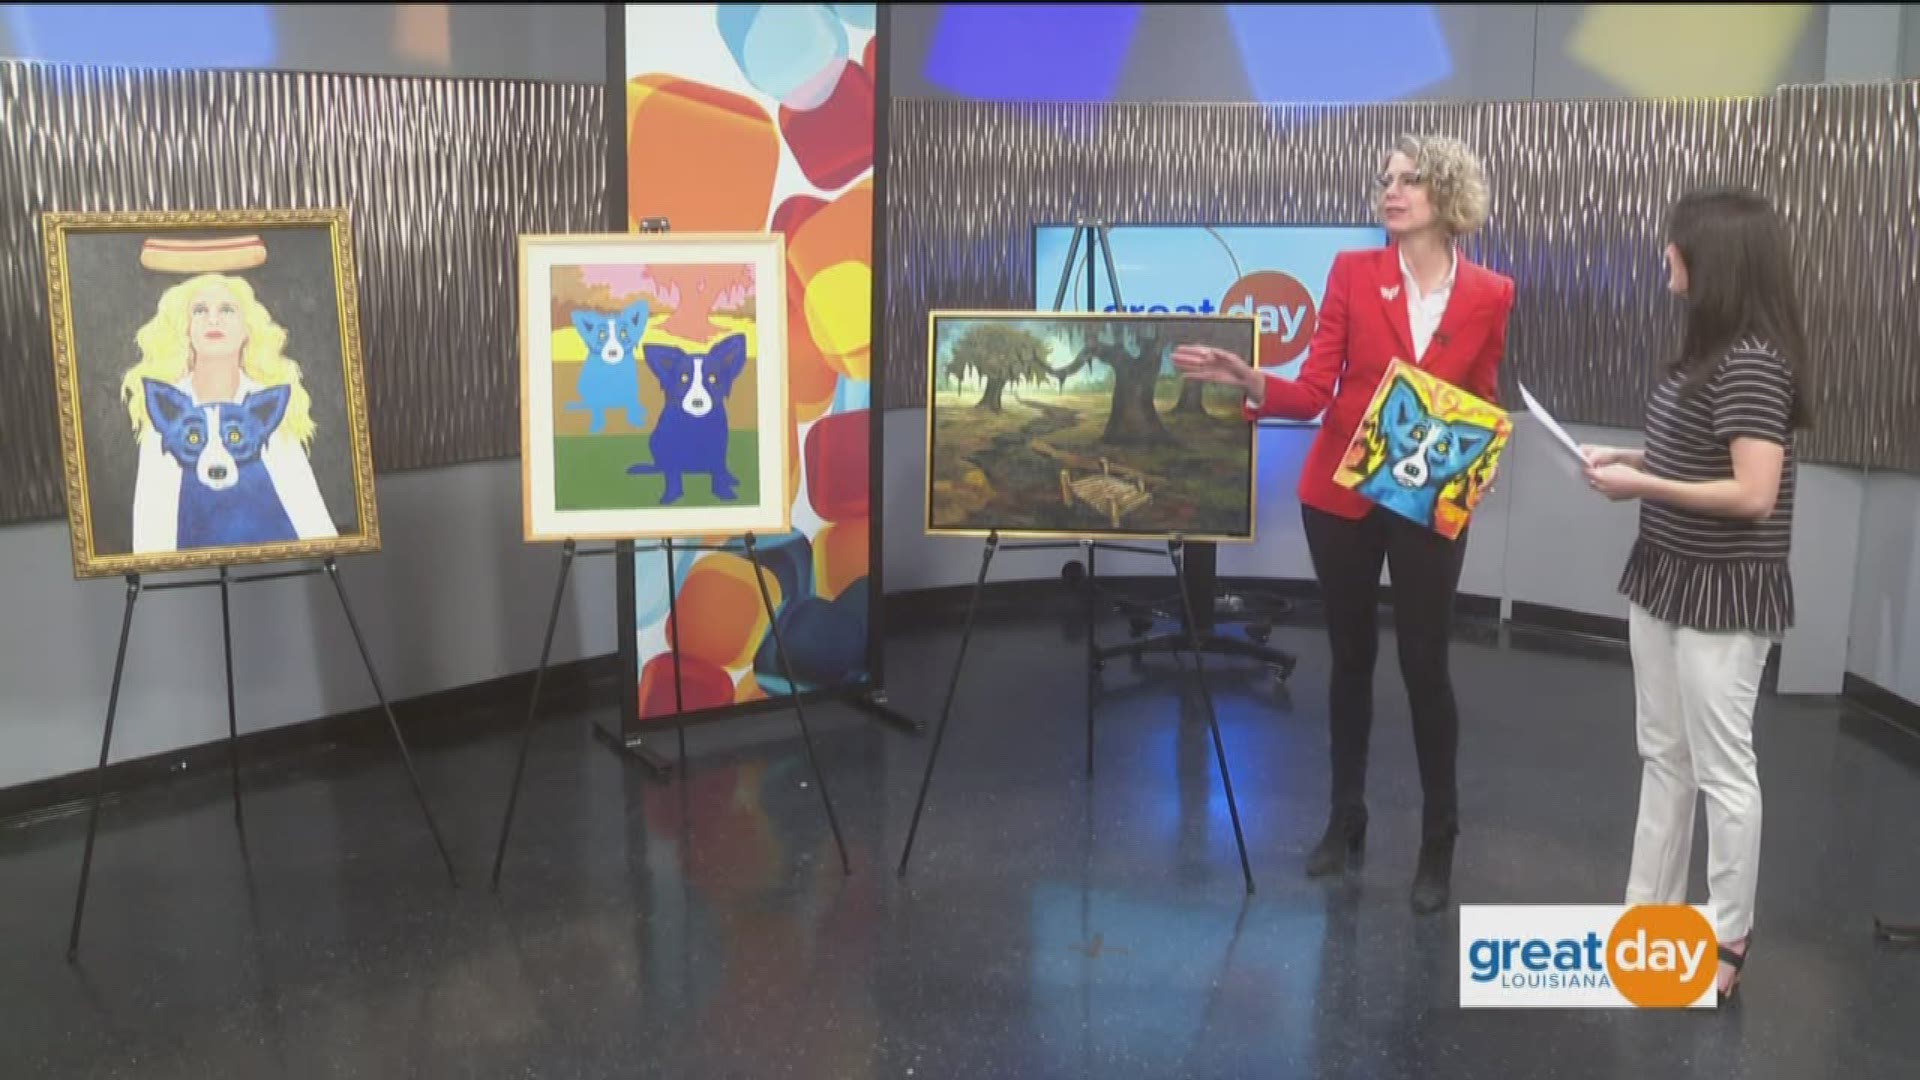 Wendy Rodrigue, widow of the late George Rodrigue, joins us to talk about the Life and Legacy Tour that celebrates the blue dog artist. For more information visit GeorgeRodrigue.com.